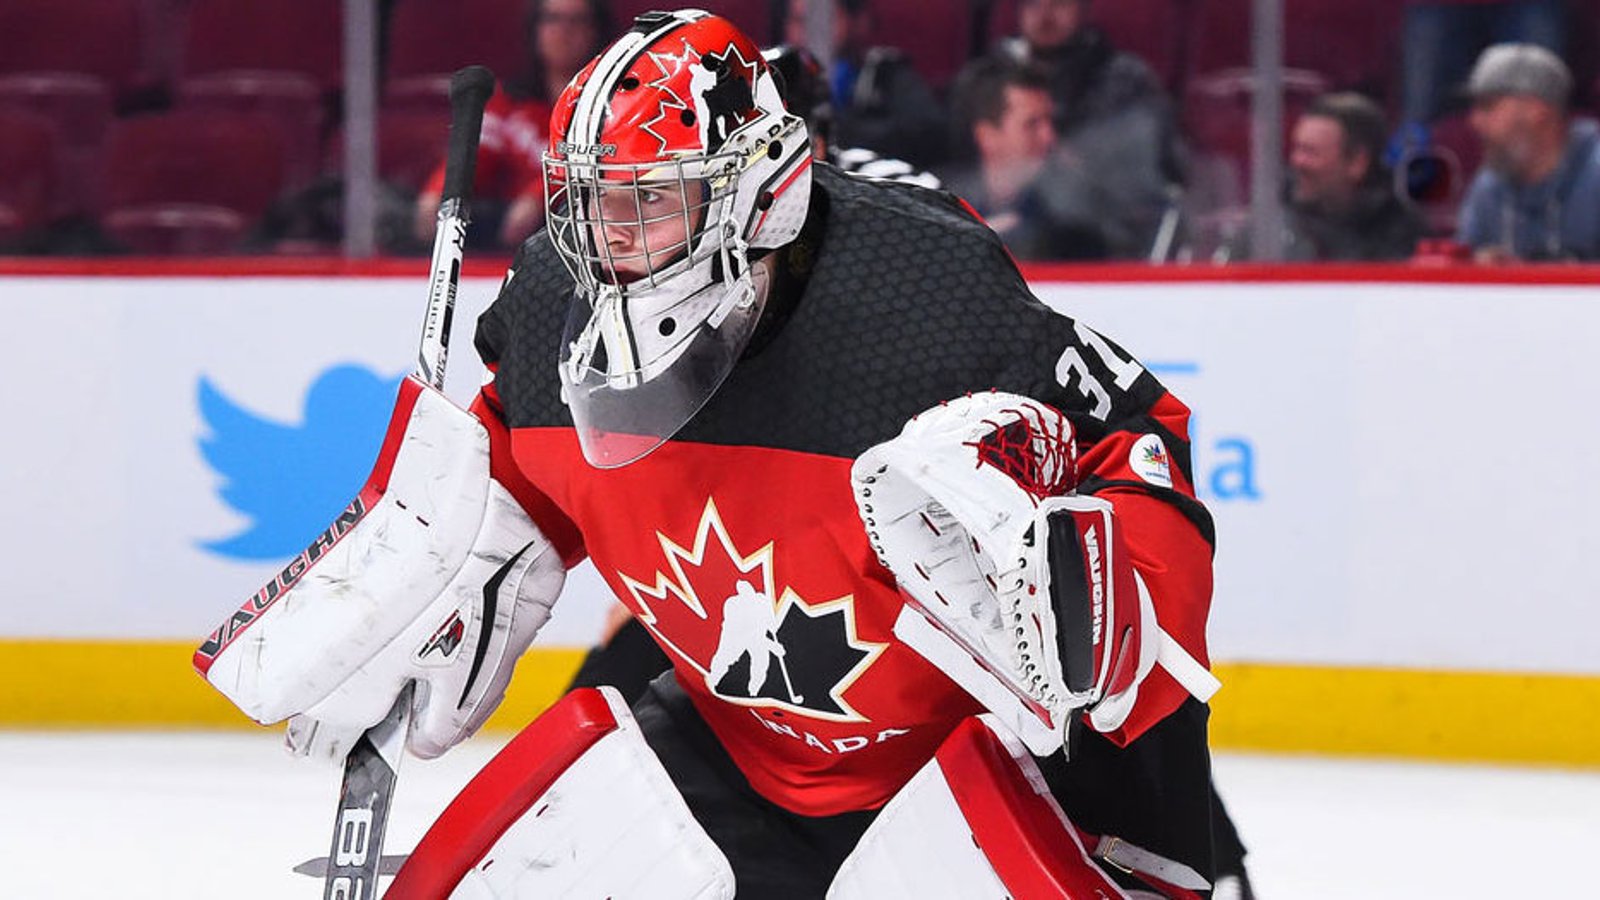 Breaking: Canada's roster for the 2018 World Junior Championship revealed! 